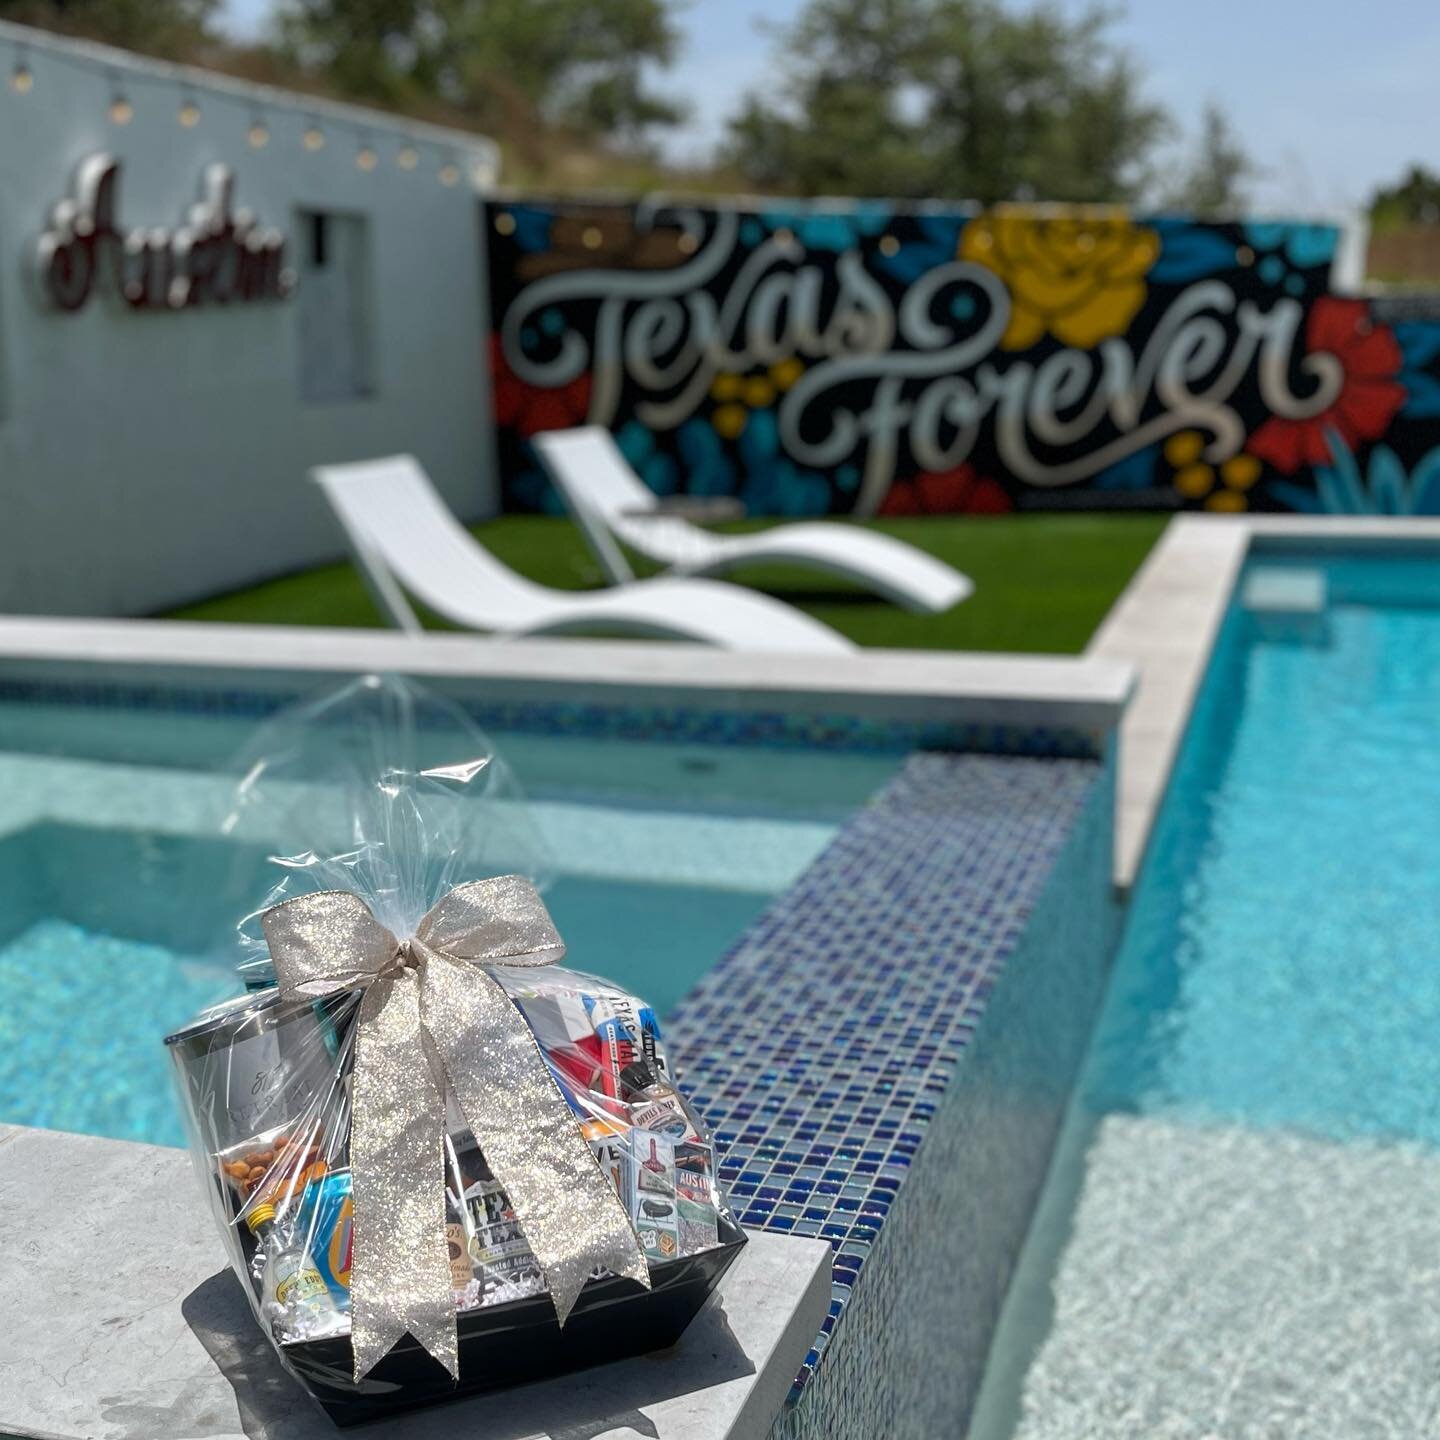 Love this new mural @512retreat vacation rental! Book a stay and enjoy one of our Texas themed gift baskets! Texas Forever! #austin #texas #airbnb #gift #vacation #relax #pool